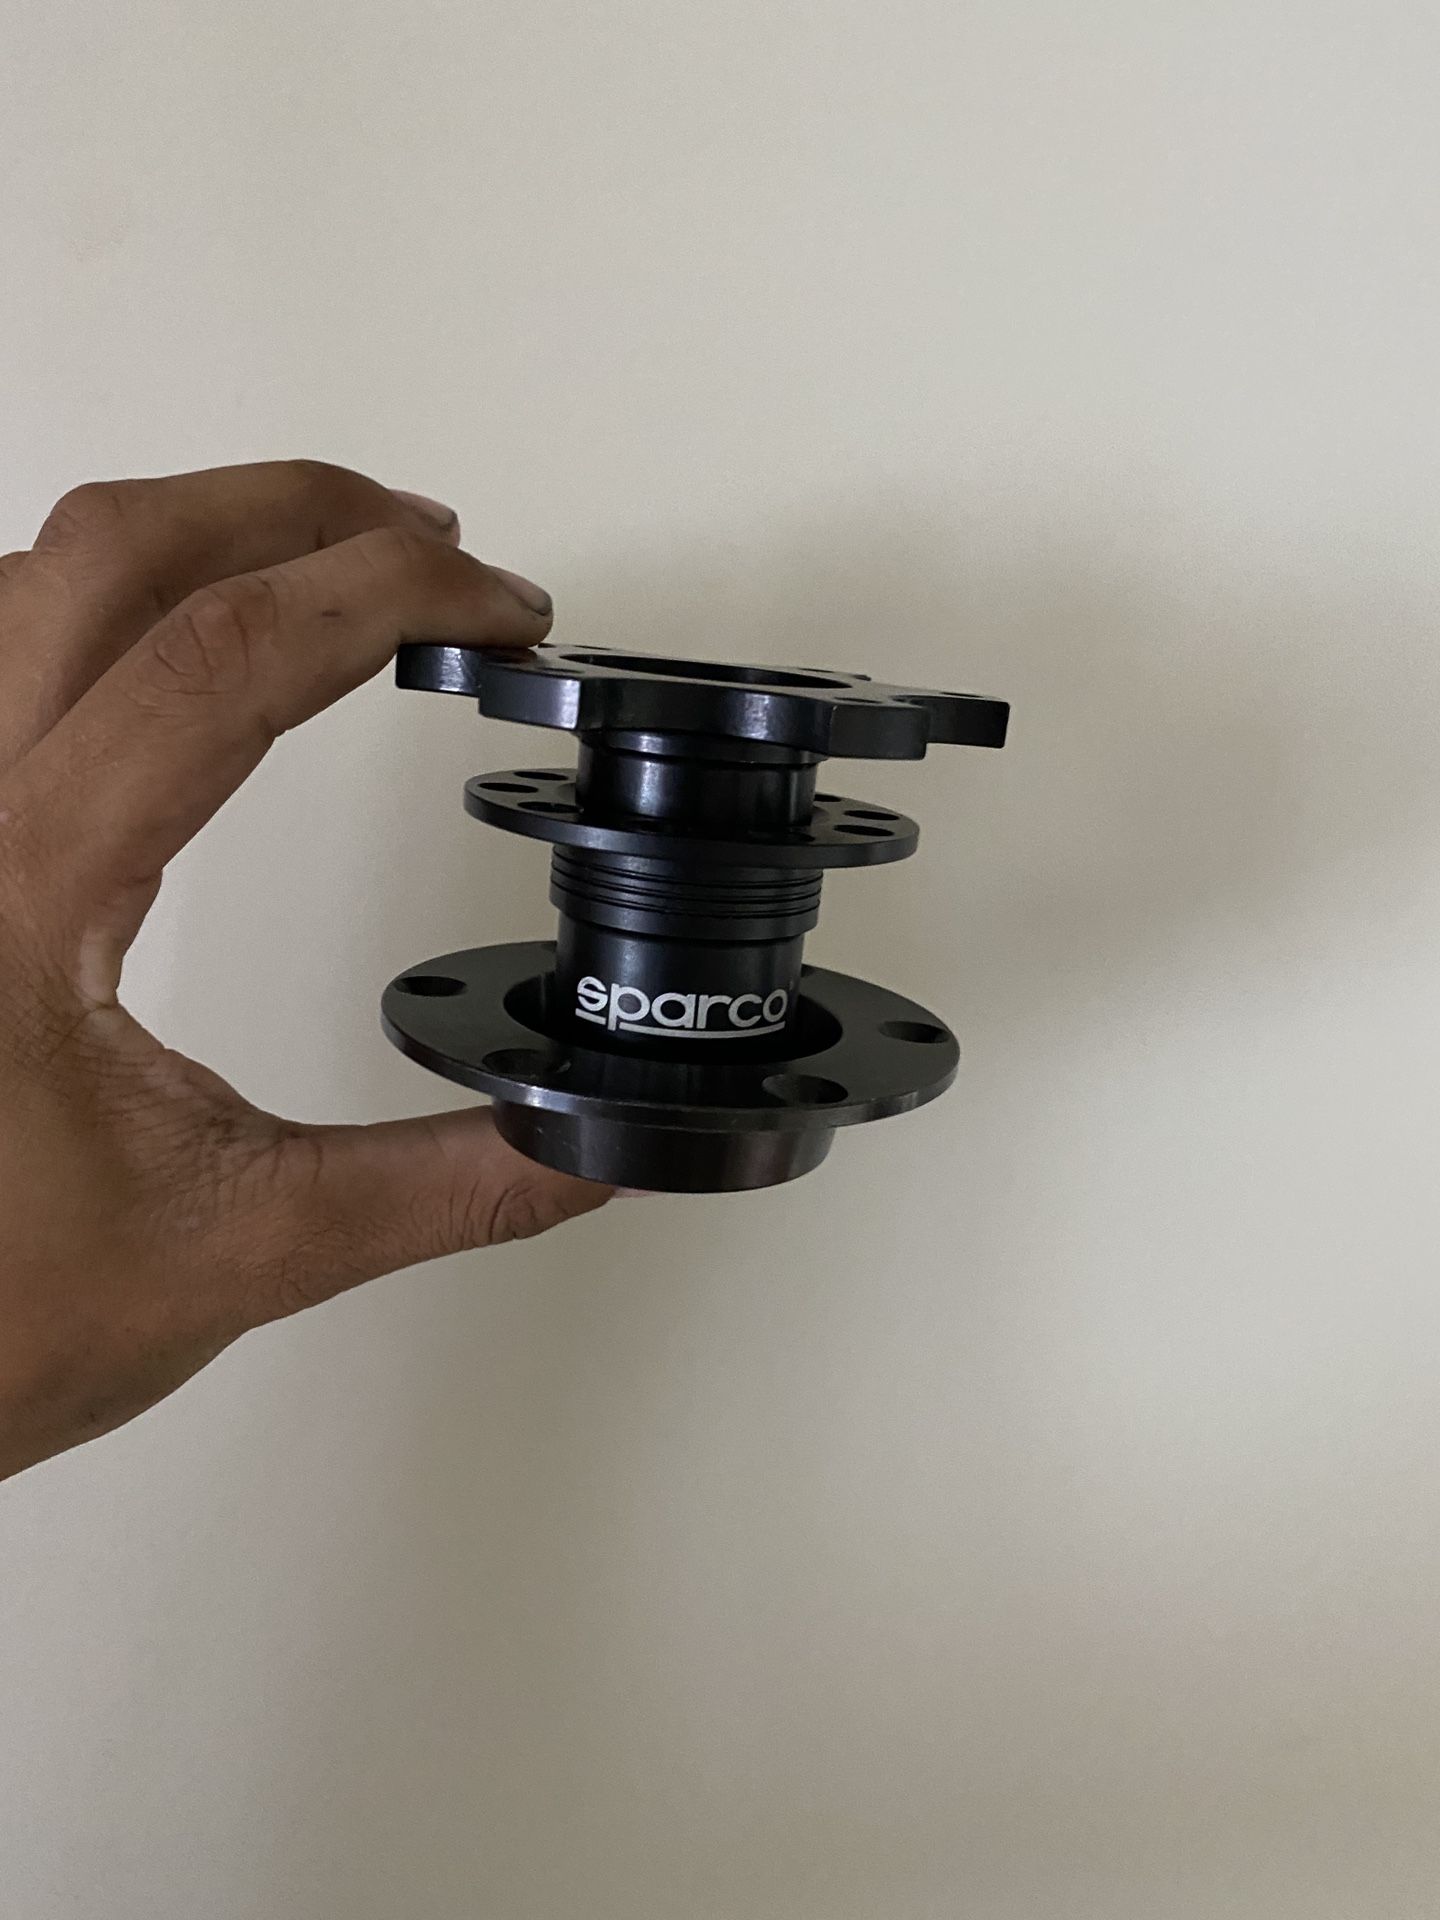 Sparco quick release